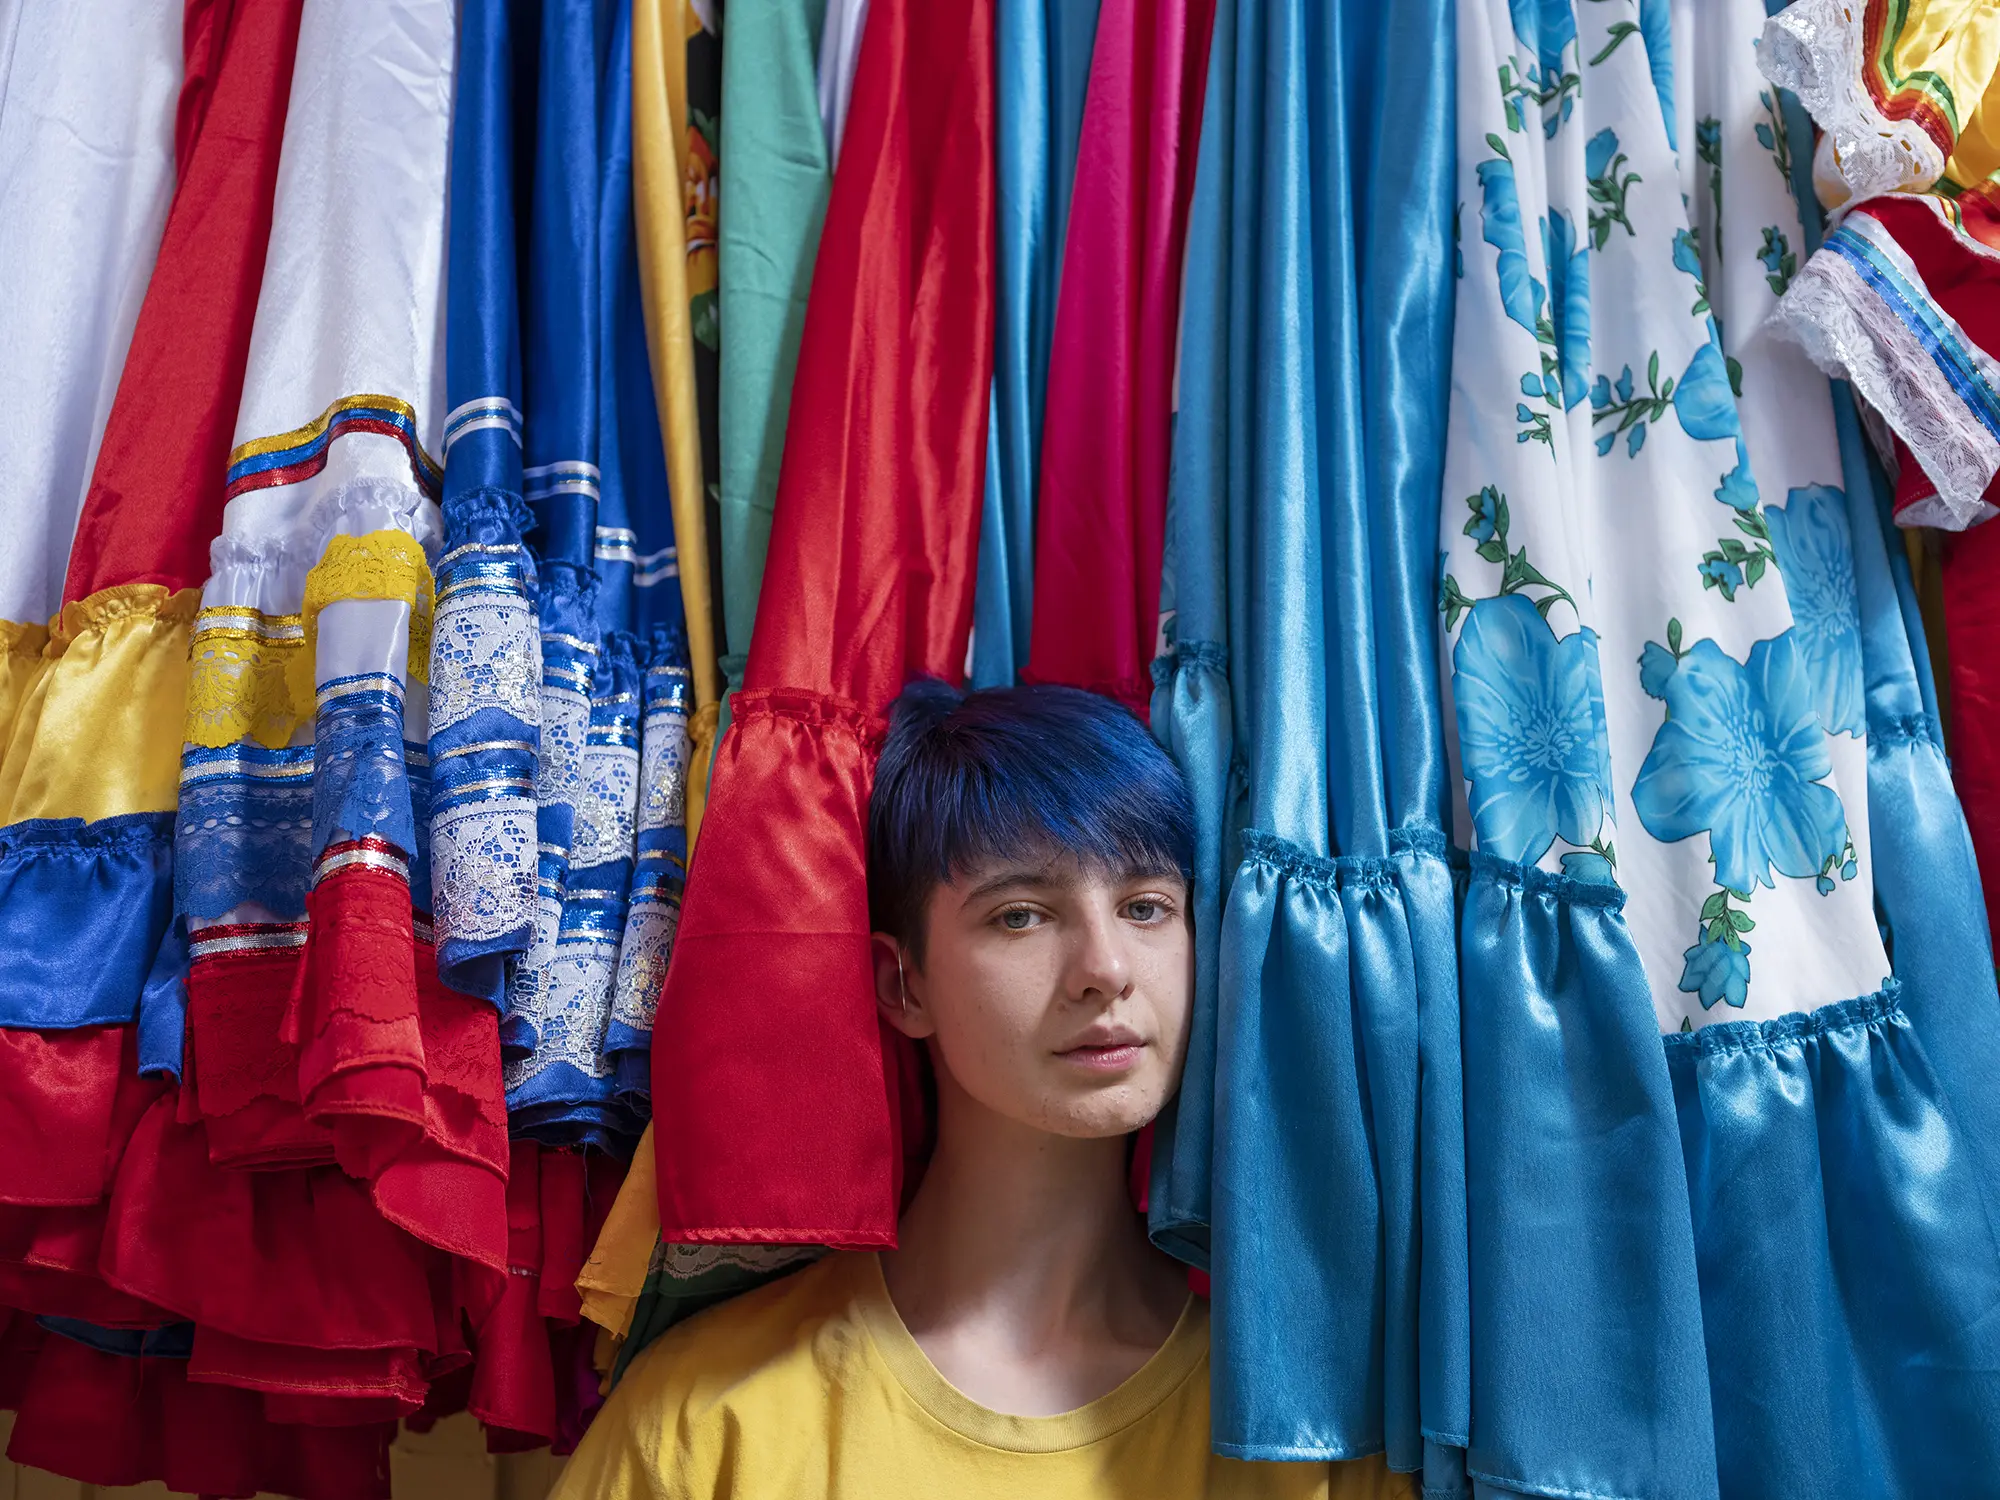 A young individual stands between traditional dresses